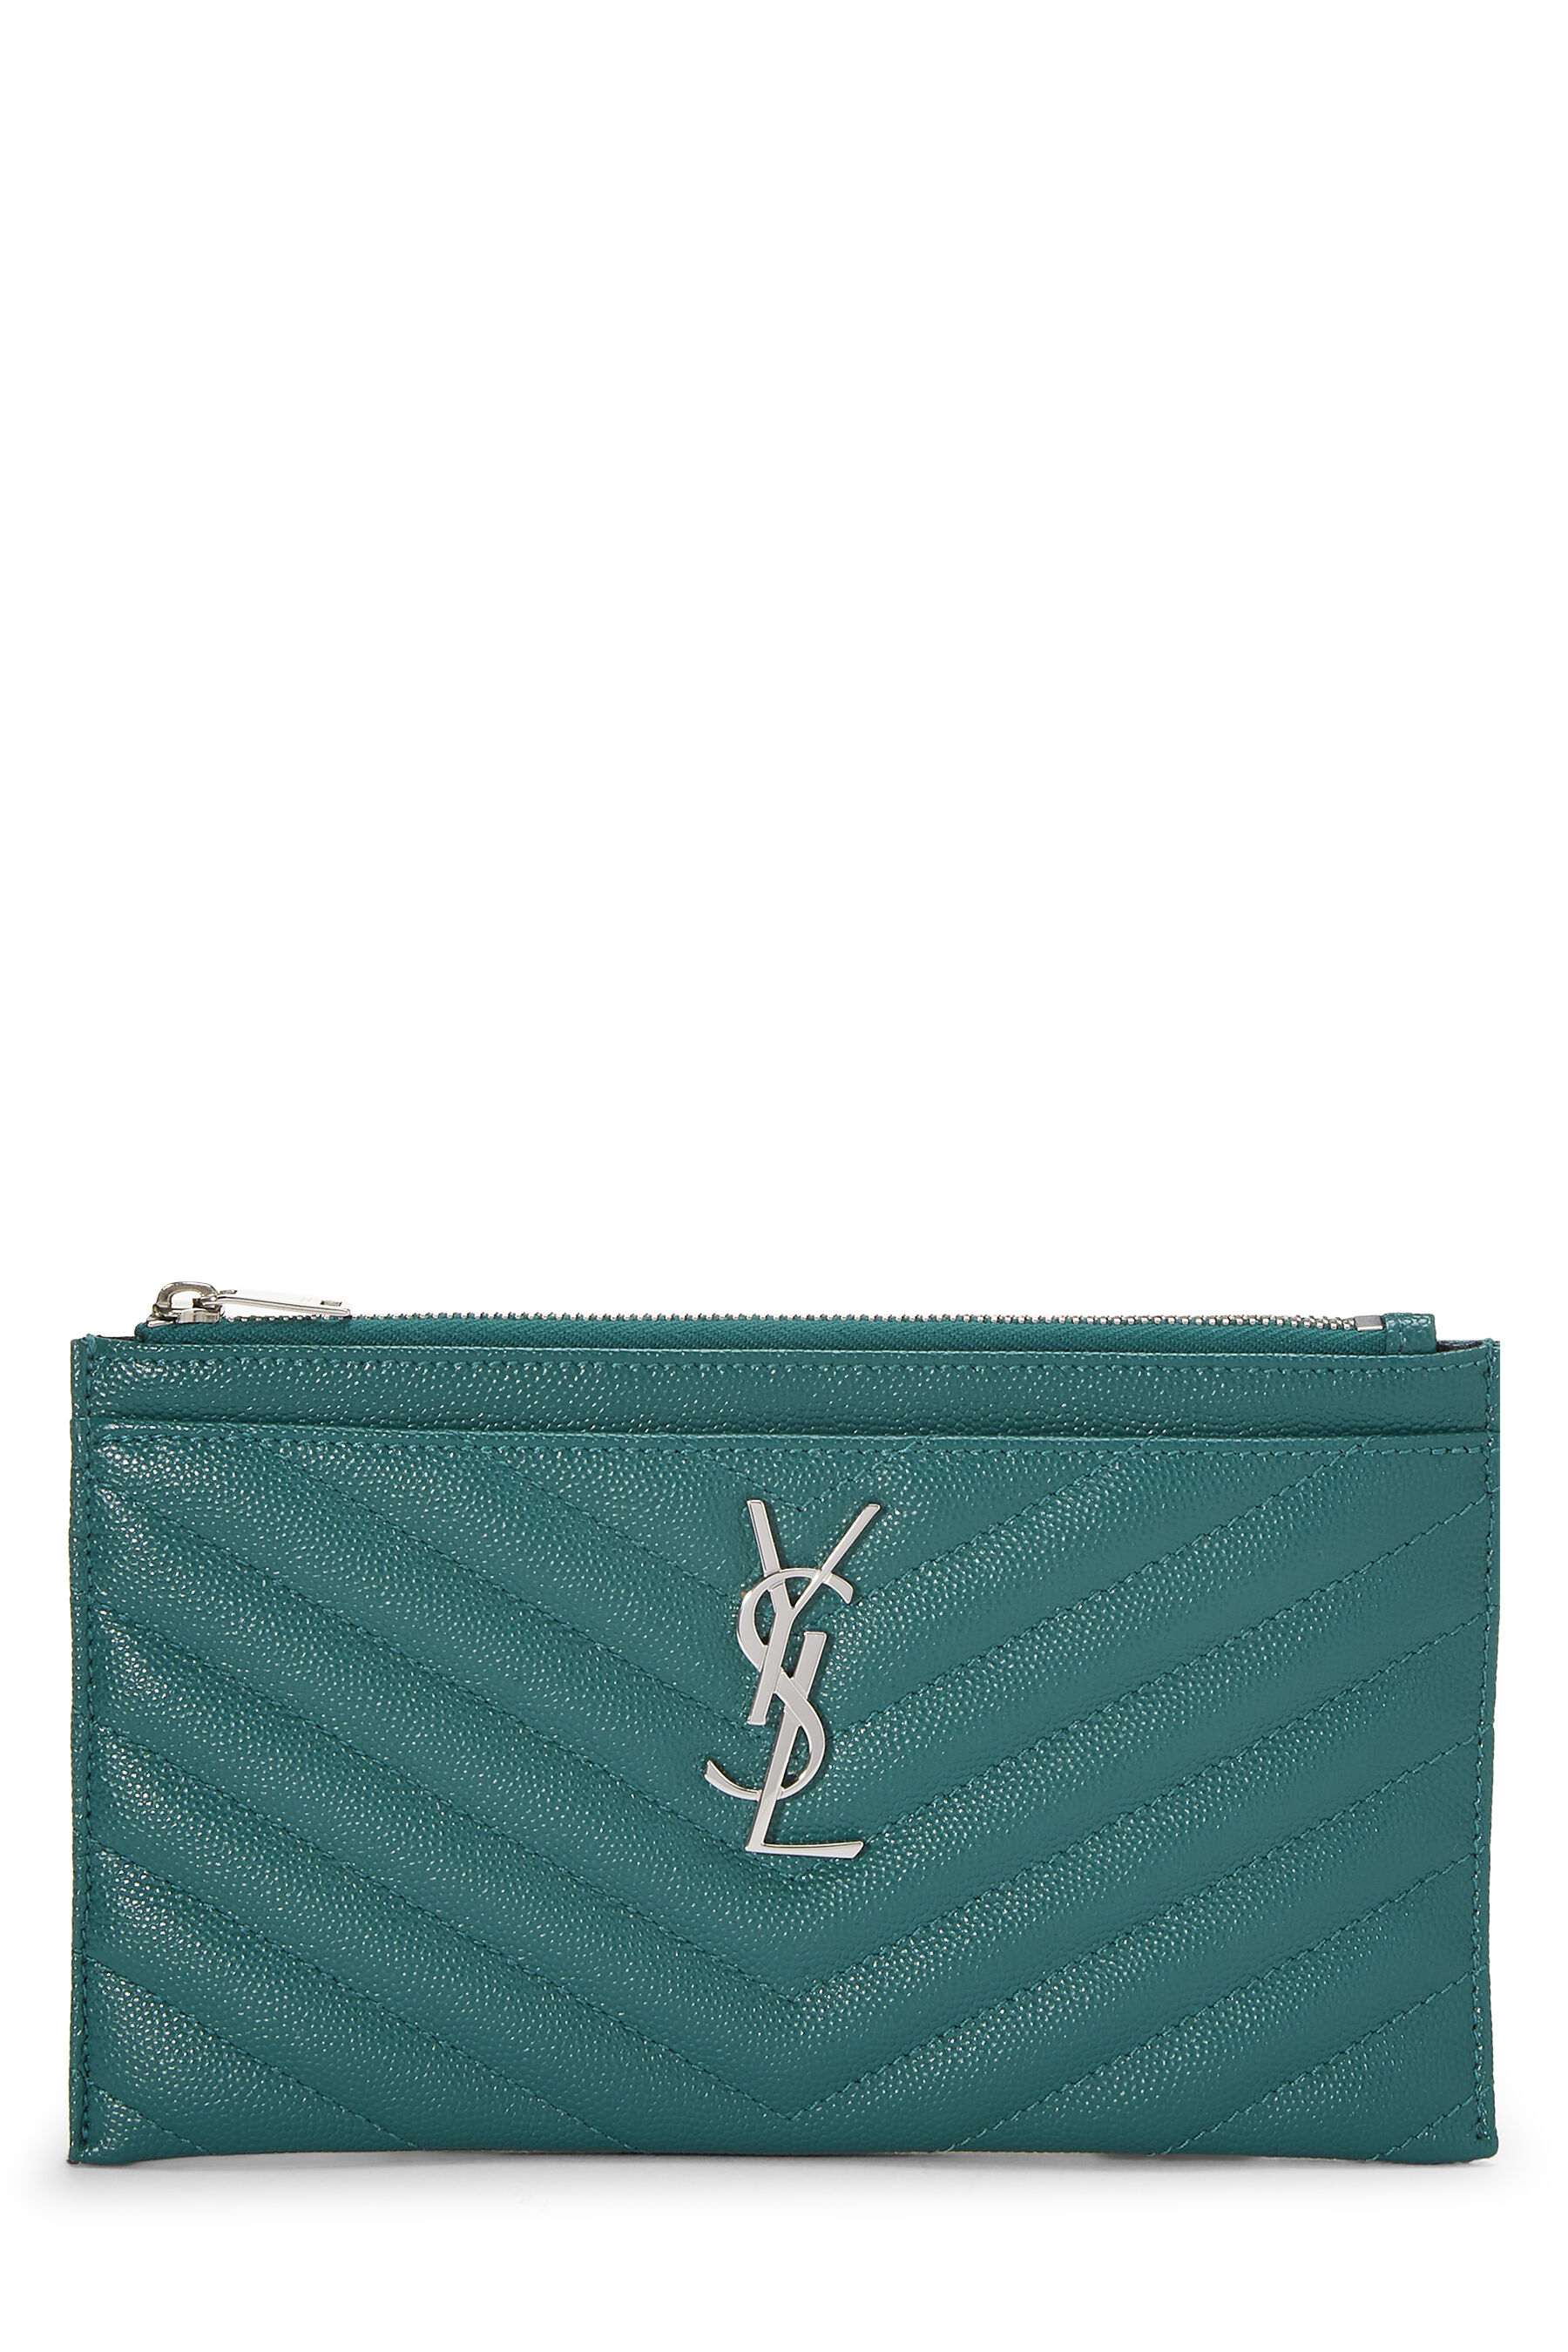 Ysl - Green Quilted Grainy Zip Pouch